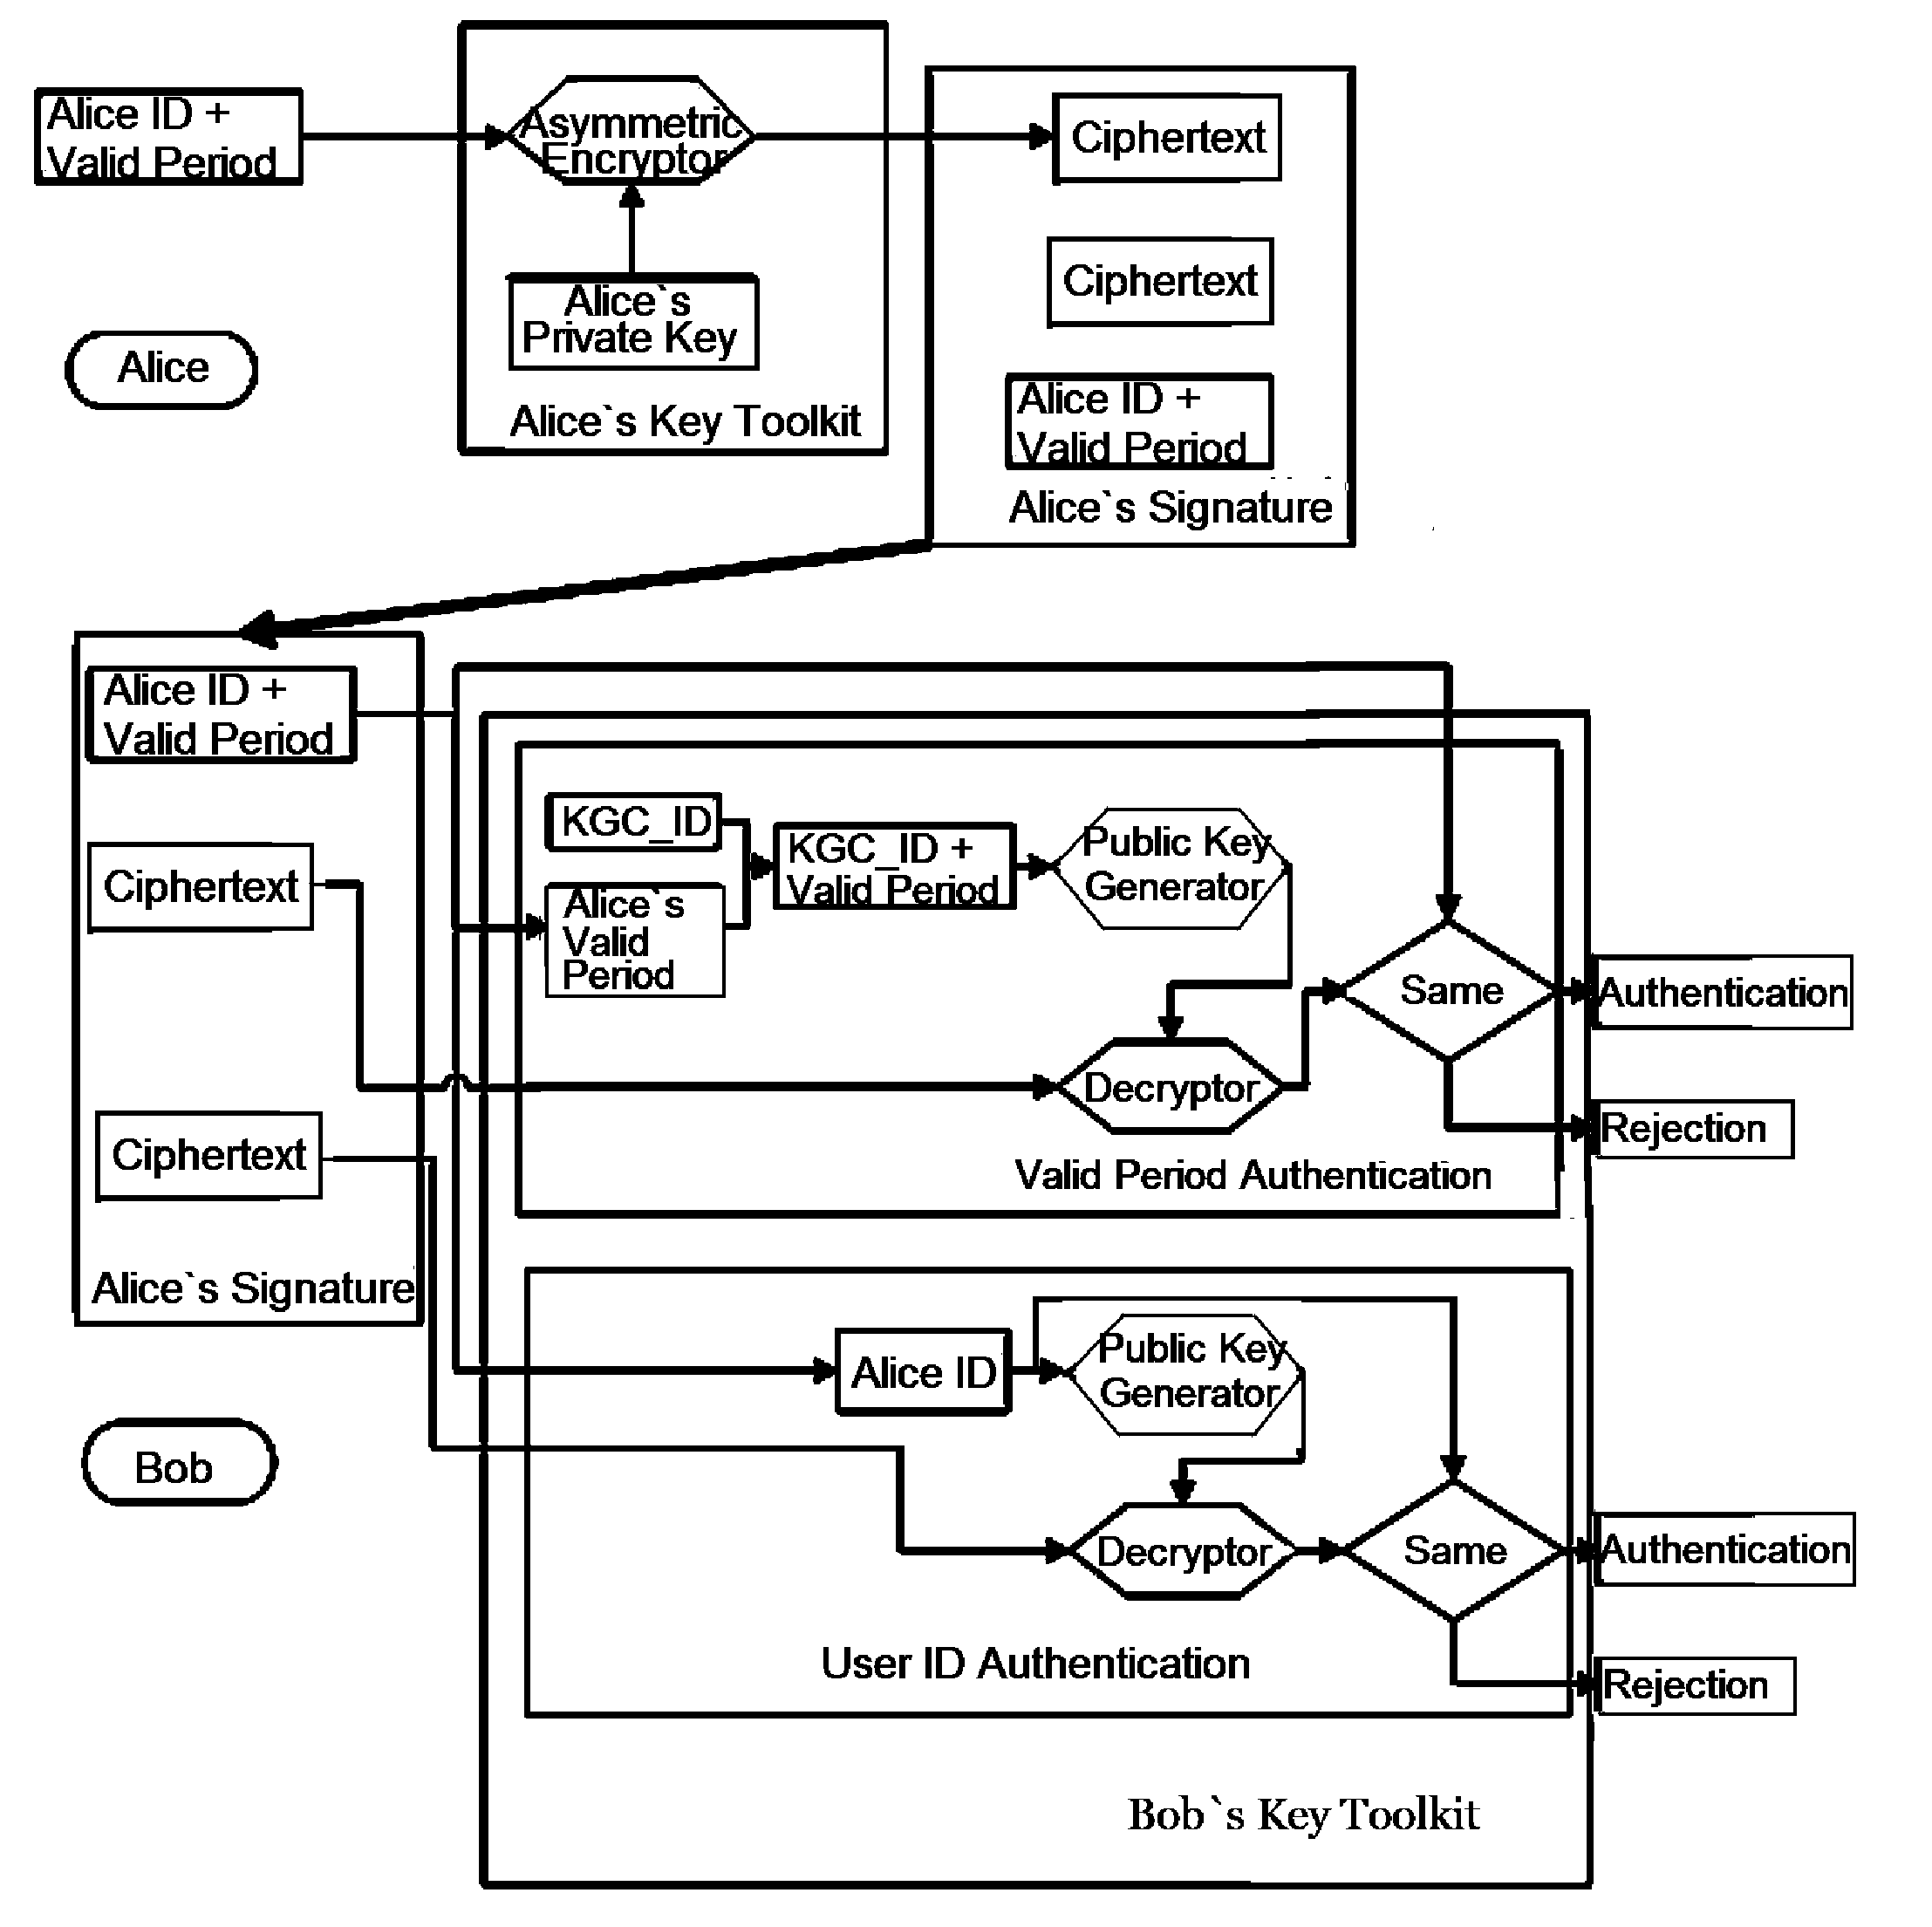 Self-authenticated method with timestamp